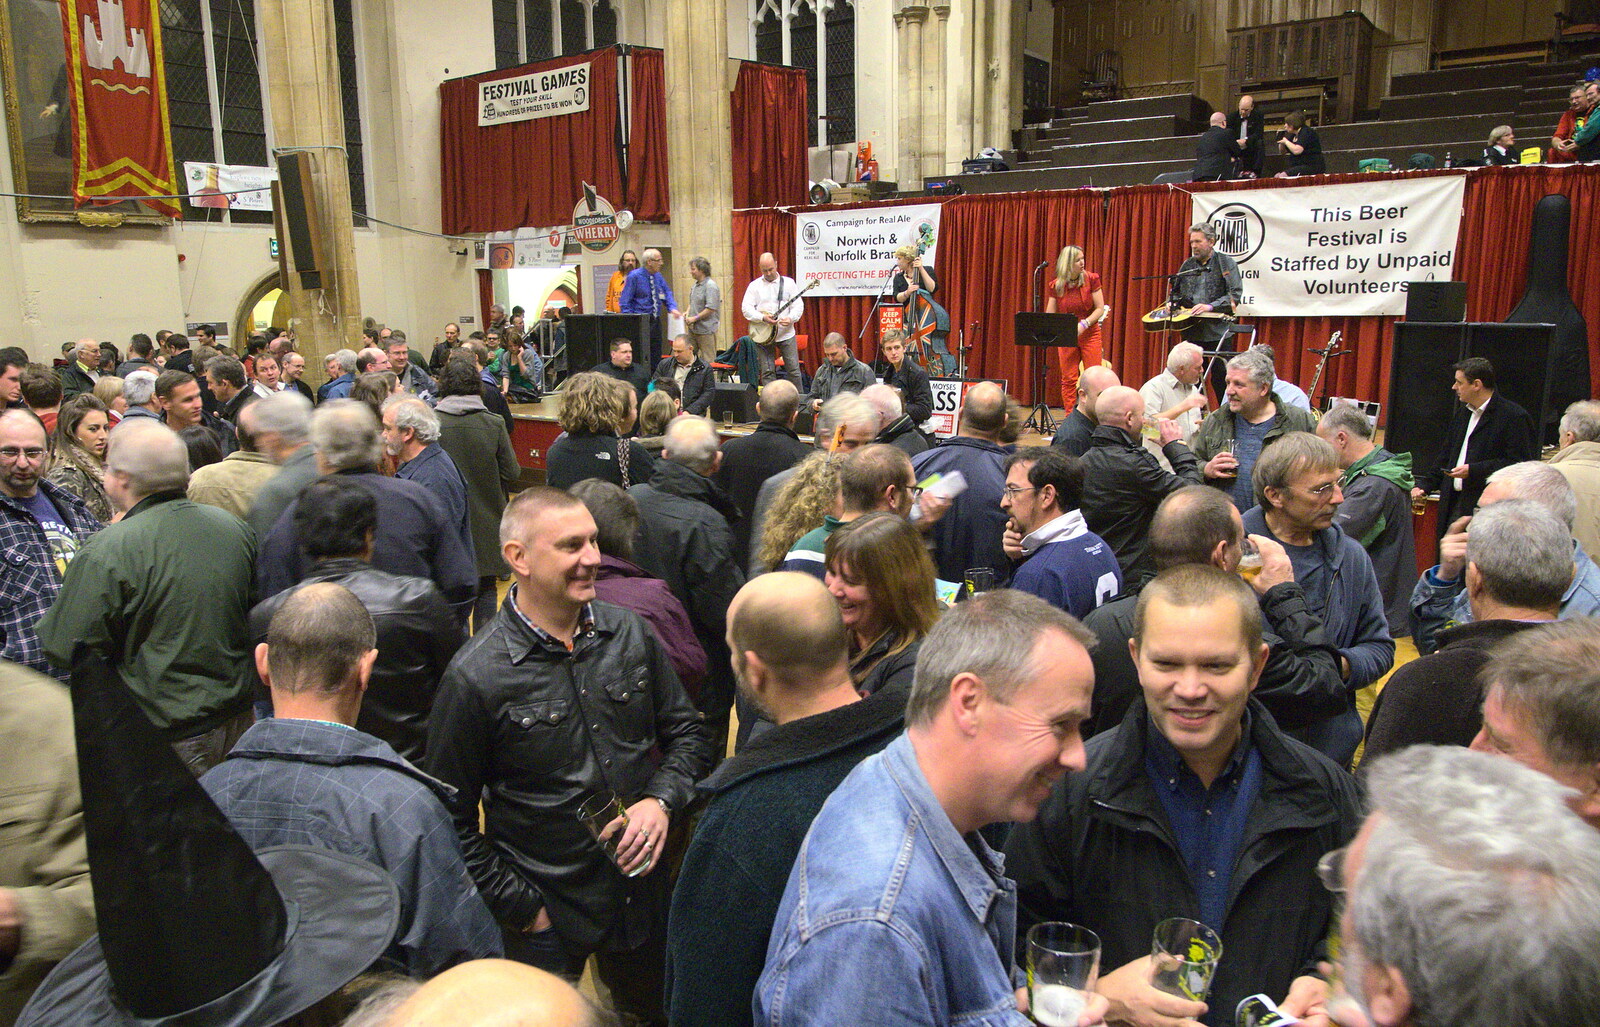 Beer crowds in St. Andrew's Hall from The 35th Norwich Beer Festival, St. Andrew's Hall, Norwich - 31st October 2012